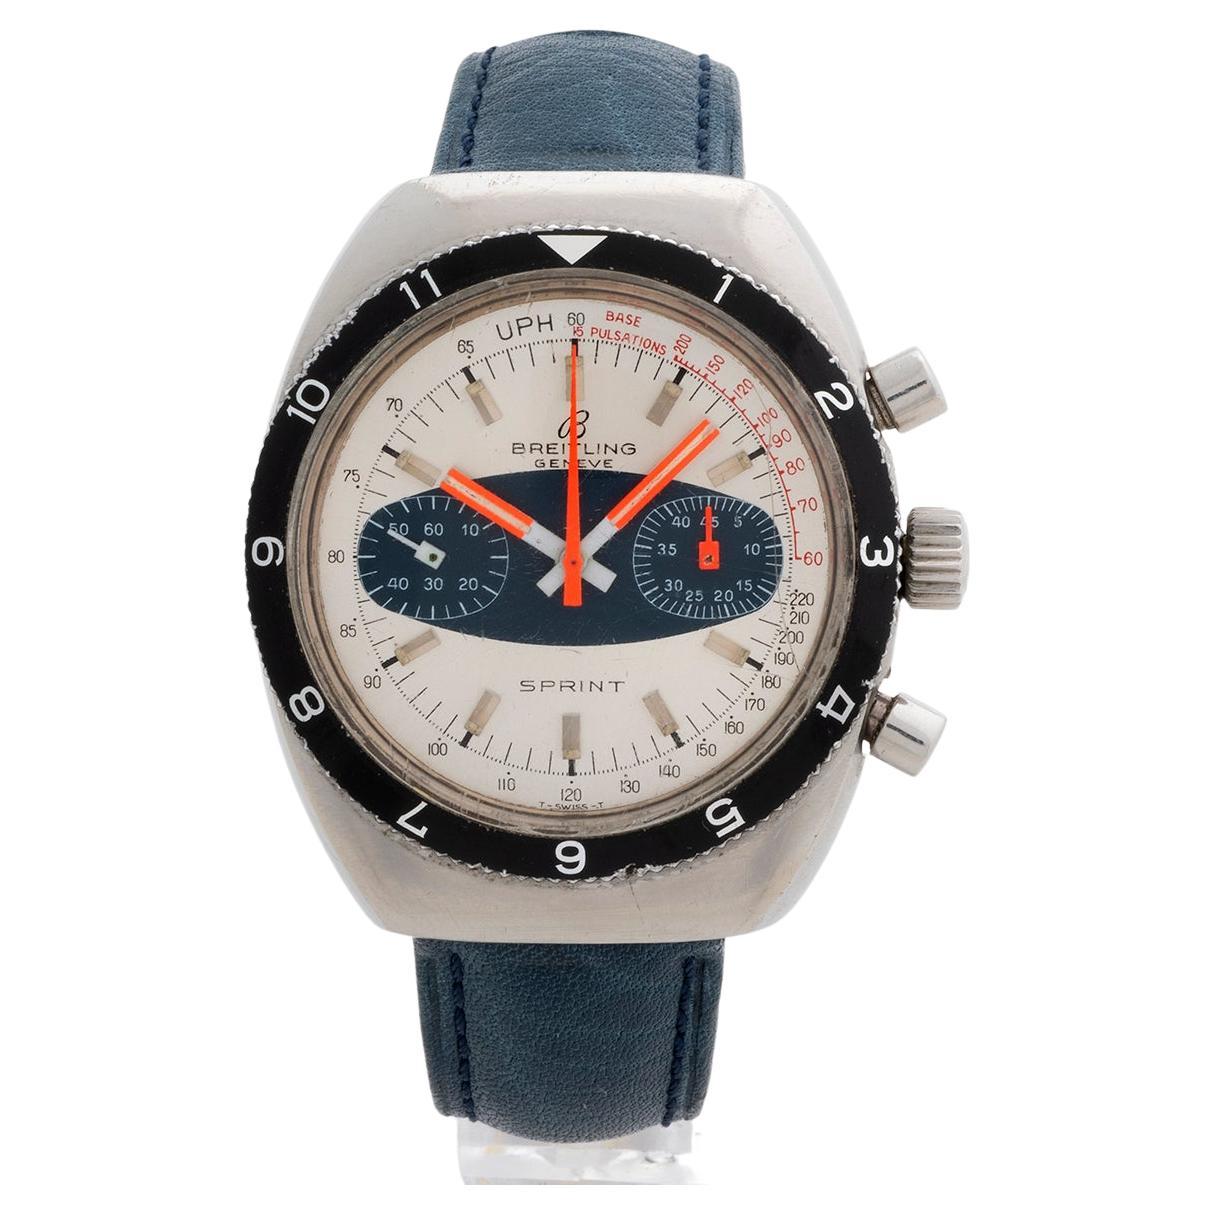 Our vintage and desirable Breitling Sprint chronograph, reference 2212 features a white / blue 